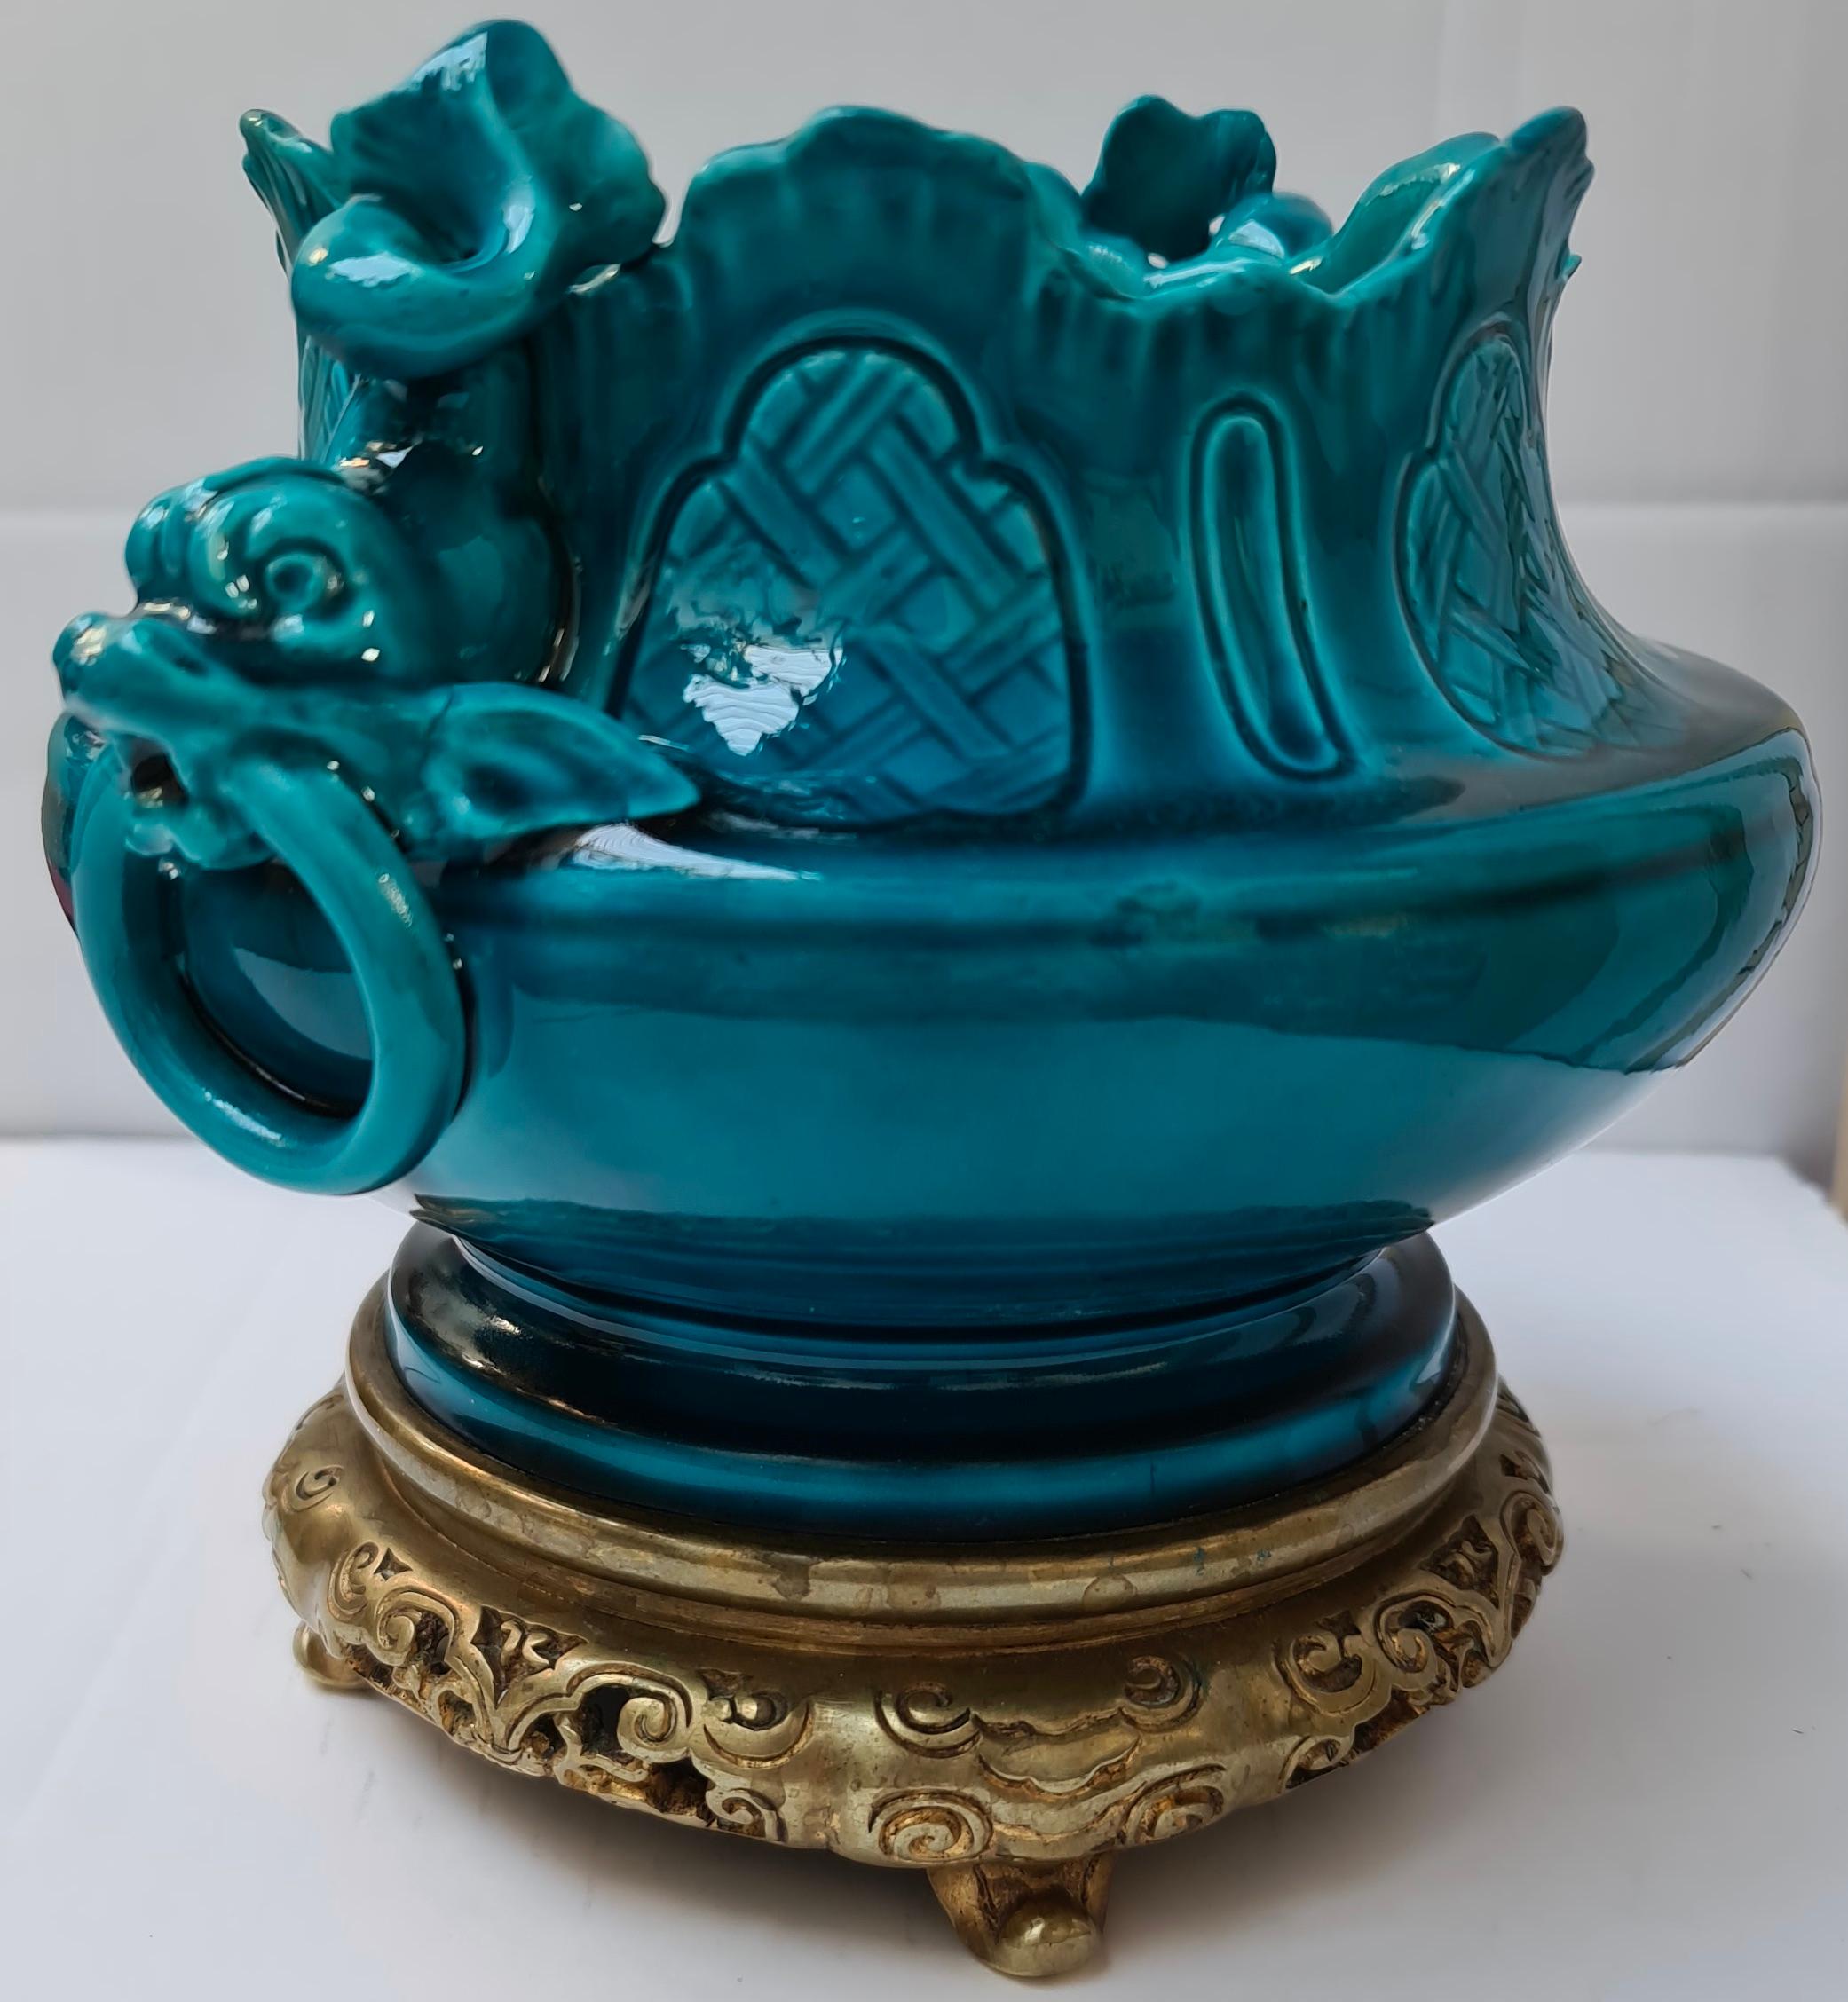 A 19th century French sèvres blue fire glazed porcelain ormolu-mounted center bowl
Applied with two Dolphins simulating handles
Signed underneath,
circa 1880.